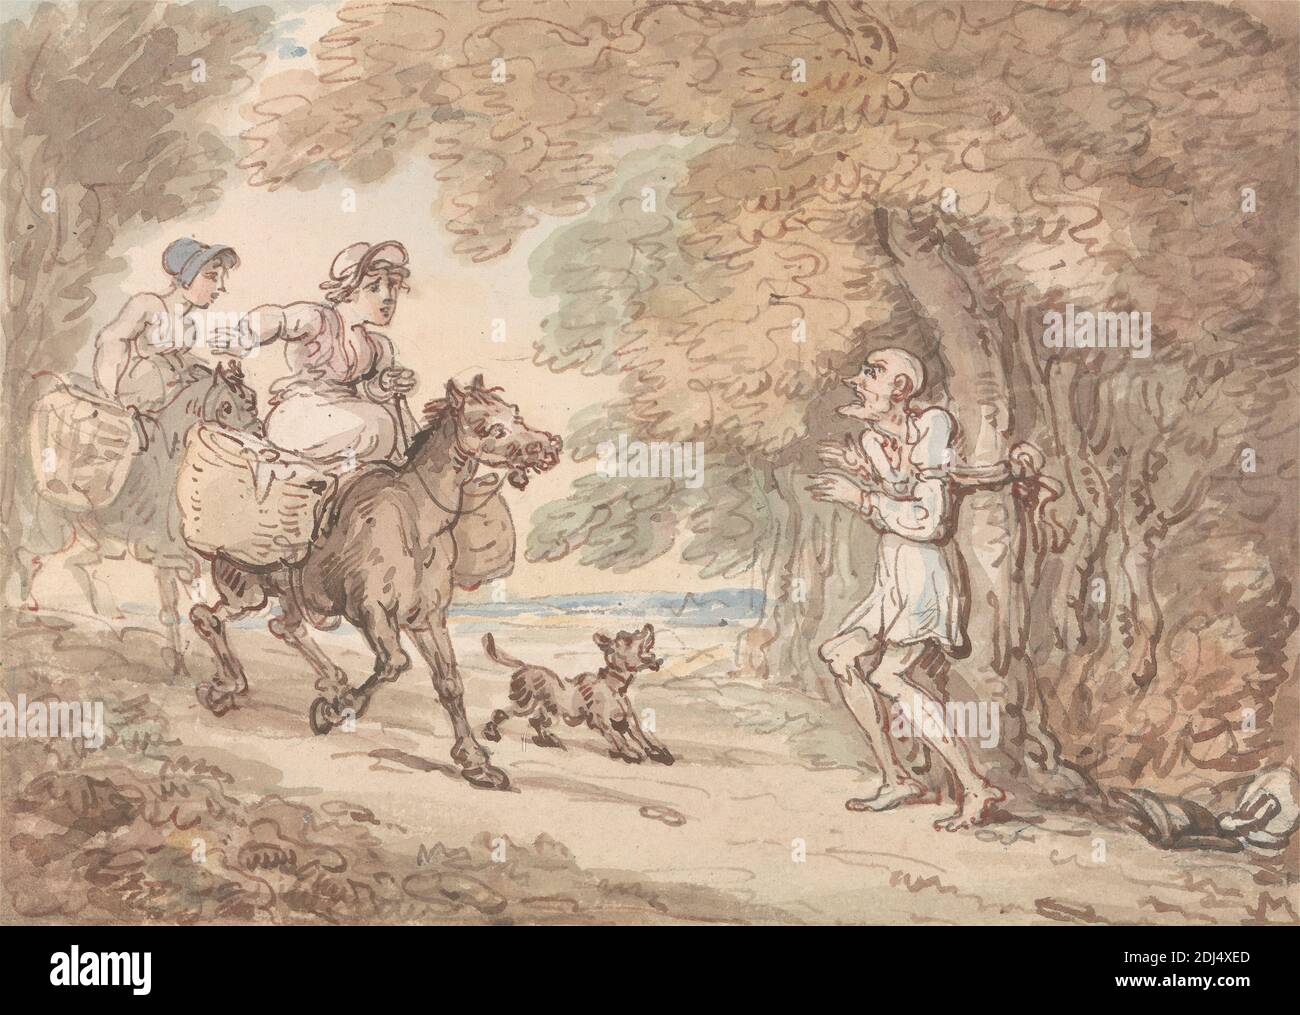 Dr. Syntax Bound to a Tree by Highwaymen, Thomas Rowlandson, 1756–1827, British, 1820, Watercolor with pen and brown and red ink over graphite on medium, slightly textured, cream wove paper, Sheet: 5 1/4 x 7 1/4 inches (13.3 x 18.4 cm) and Mount: 8 3/8 x 10 5/8 inches (21.3 x 27 cm), baskets, country (rural landscape), dog (animal), genre subject, man, road, trees, women Stock Photo